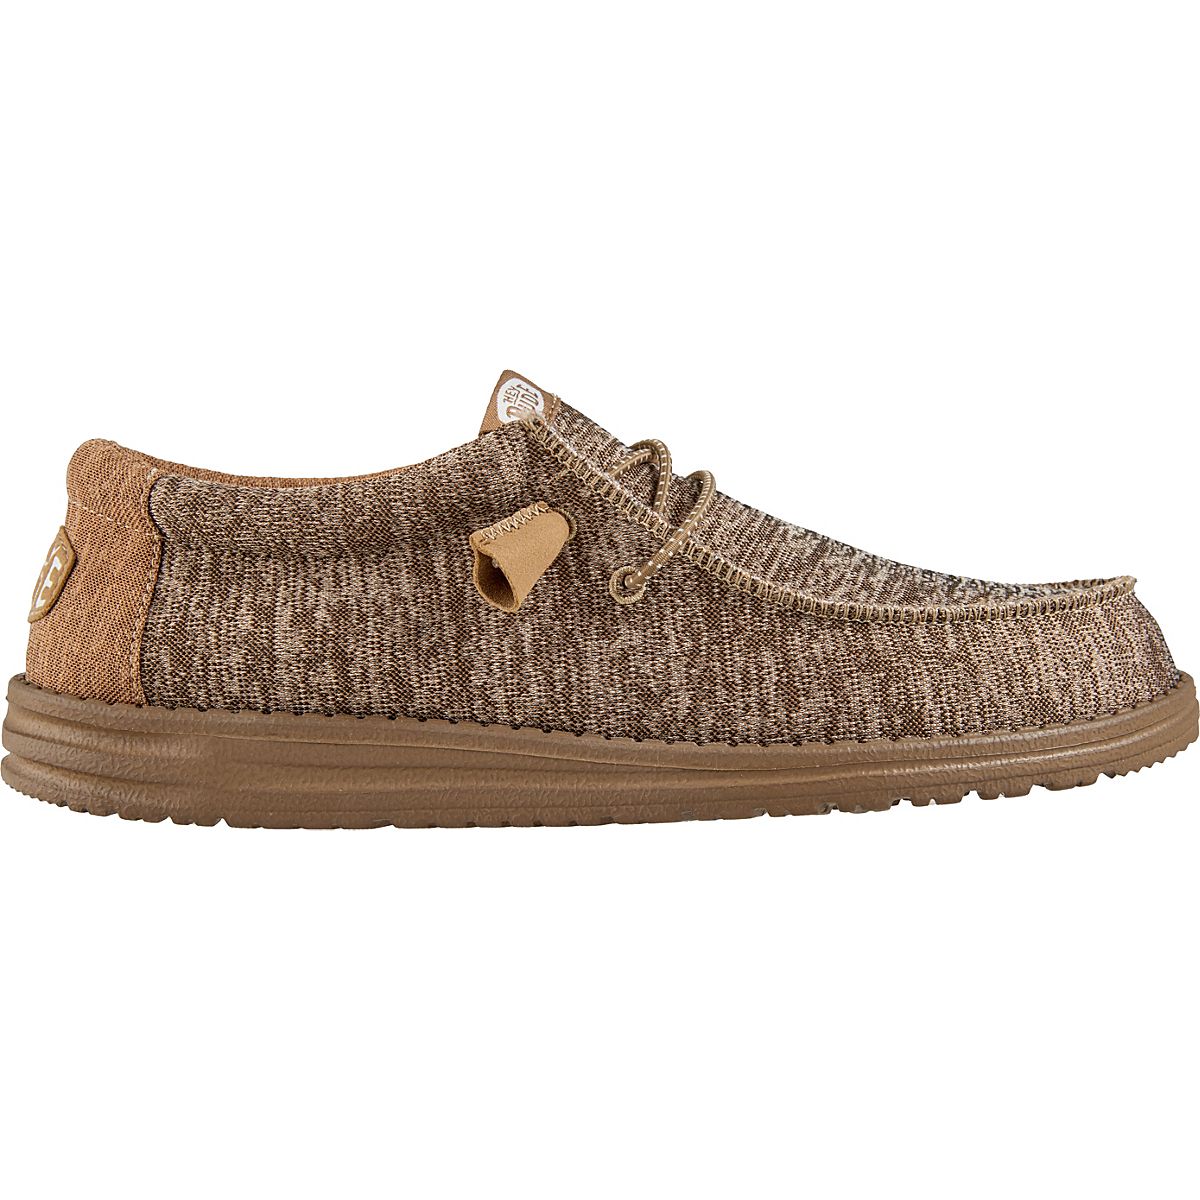 HEYDUDE Men’s Wally Sport Knit Shoes | Free Shipping at Academy